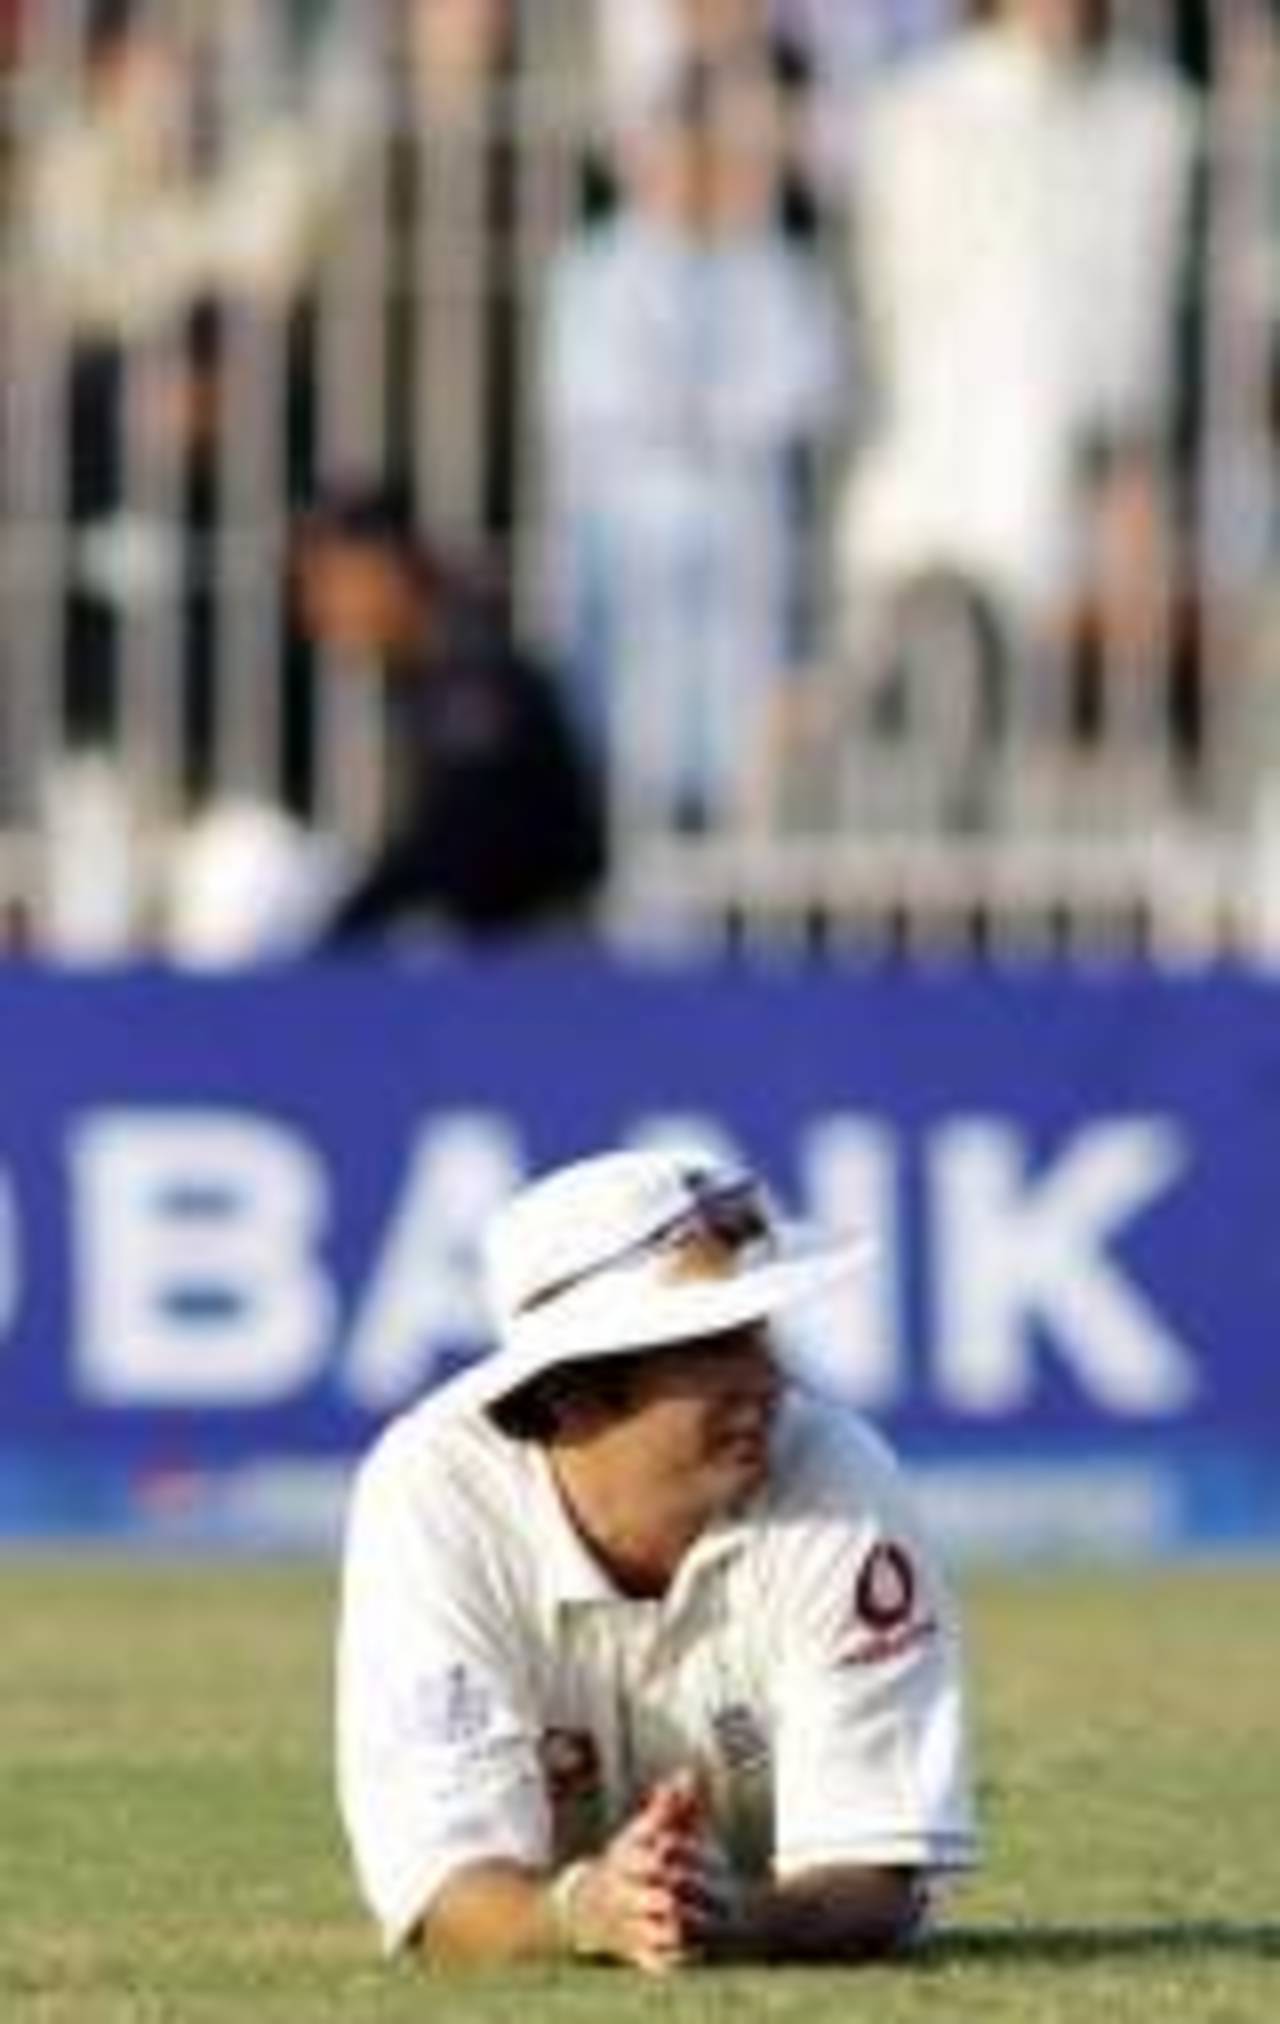 Down it goes: Michael Vaughan reflects on his dropped catch which handed Shahid Afridi a life, Pakistan v England, 2nd Test, Faisalabad, November 20, 2005